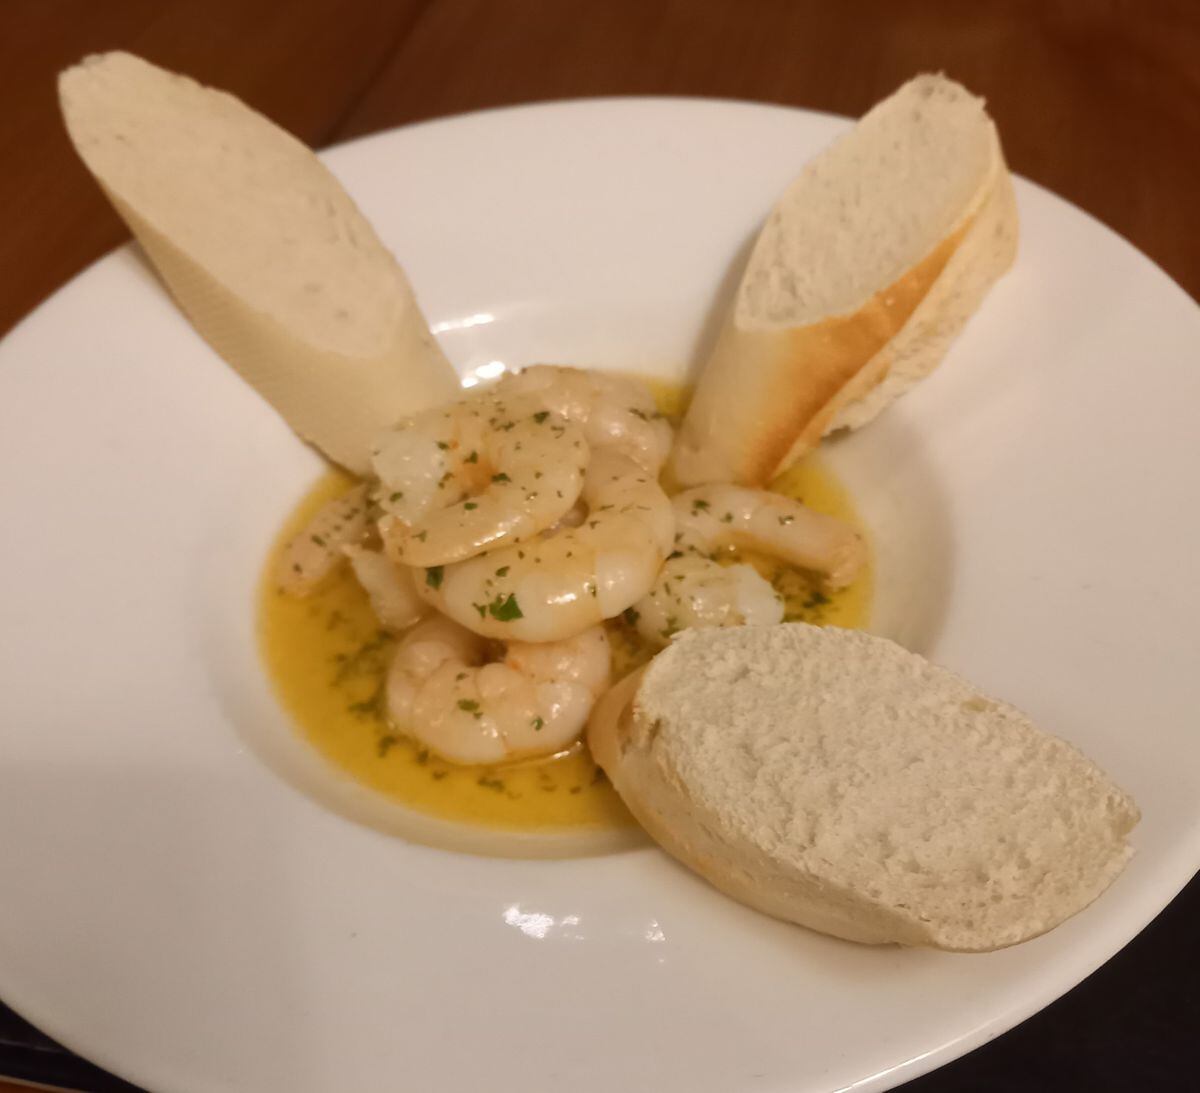 King prawns in a garlic and parsley butter sauce